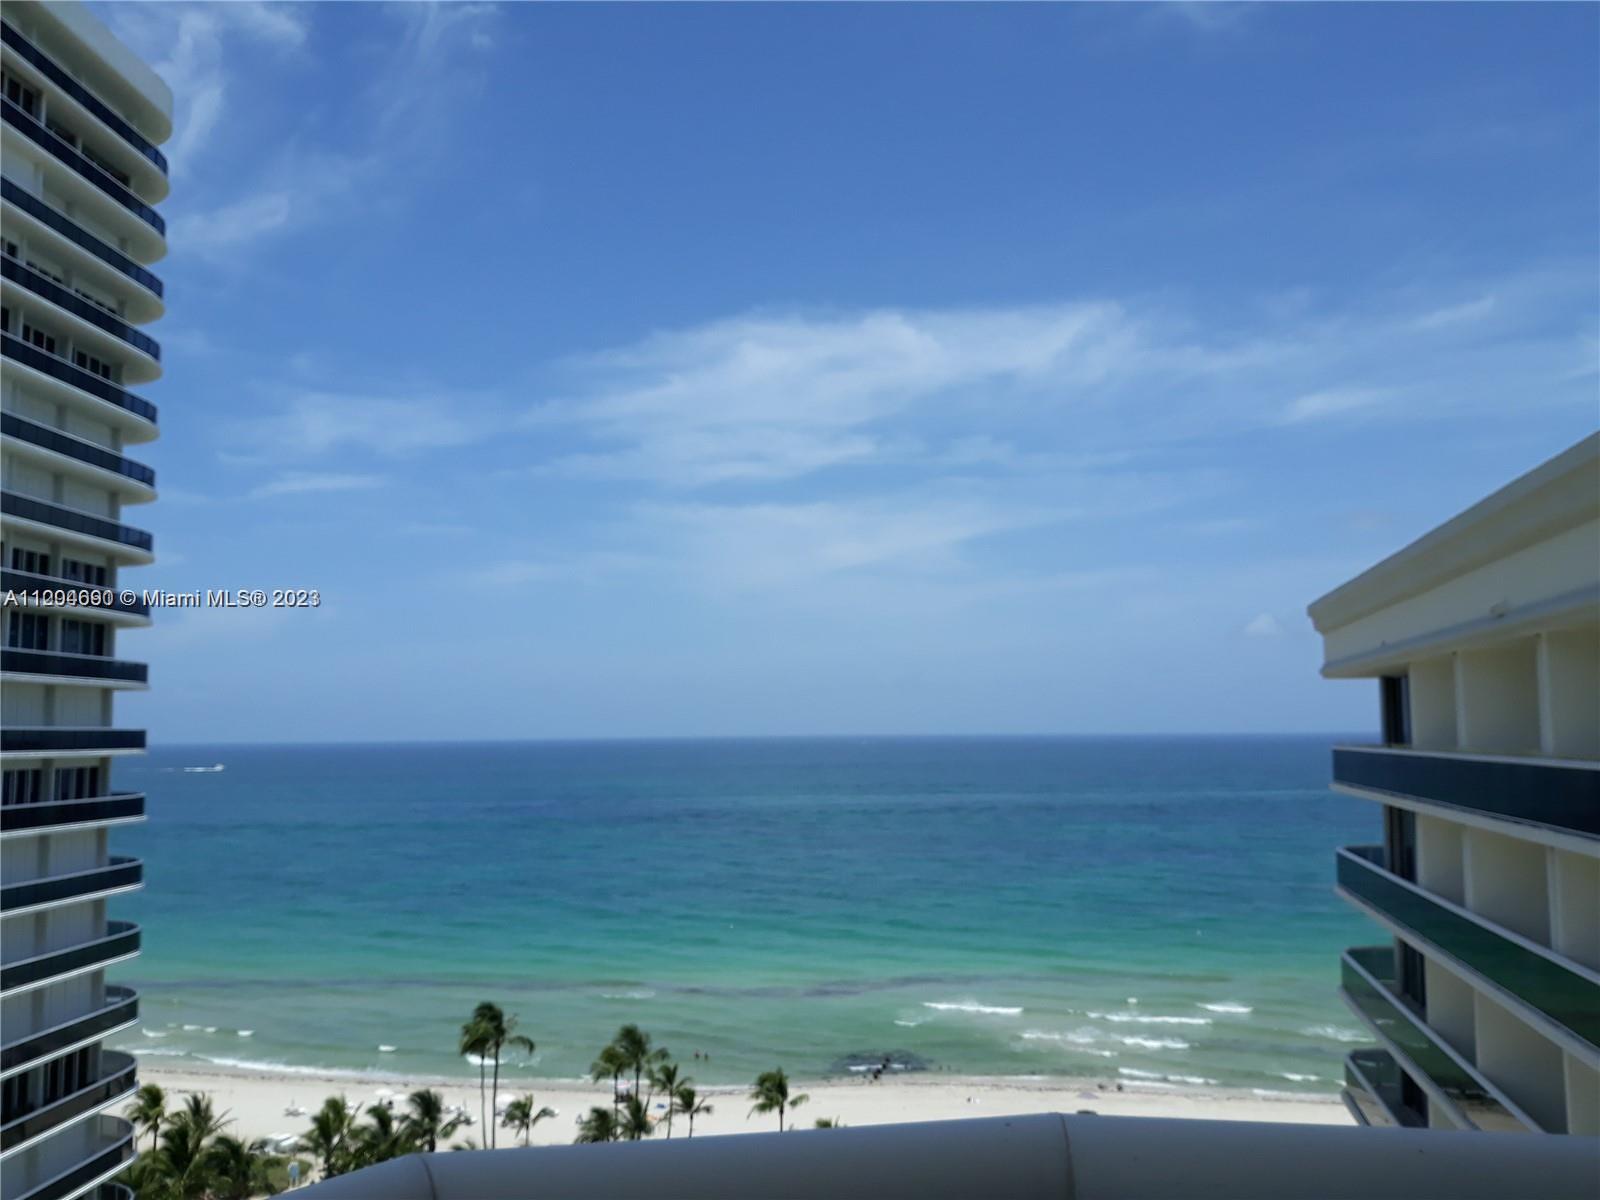 Very beautifully appointed spacious corner Oceanfront Ph in the solimar, over 12ft ceilings boast this ocean front 2bed 2,5 bath,  Best location in Bal harbour walking distance to bal harbour shops. This residence has gorgeous wood floors throughout, remodeled bathrooms, renovated kitchen open with window and granite counters. Beautifully custom wall builtins. Ocean views from the master suite and 2nd bedrooms with city and bay views. Walking distance to best shops and restaurants, best beach lifestyle.  Best location close to all shops and restaurants. Must see